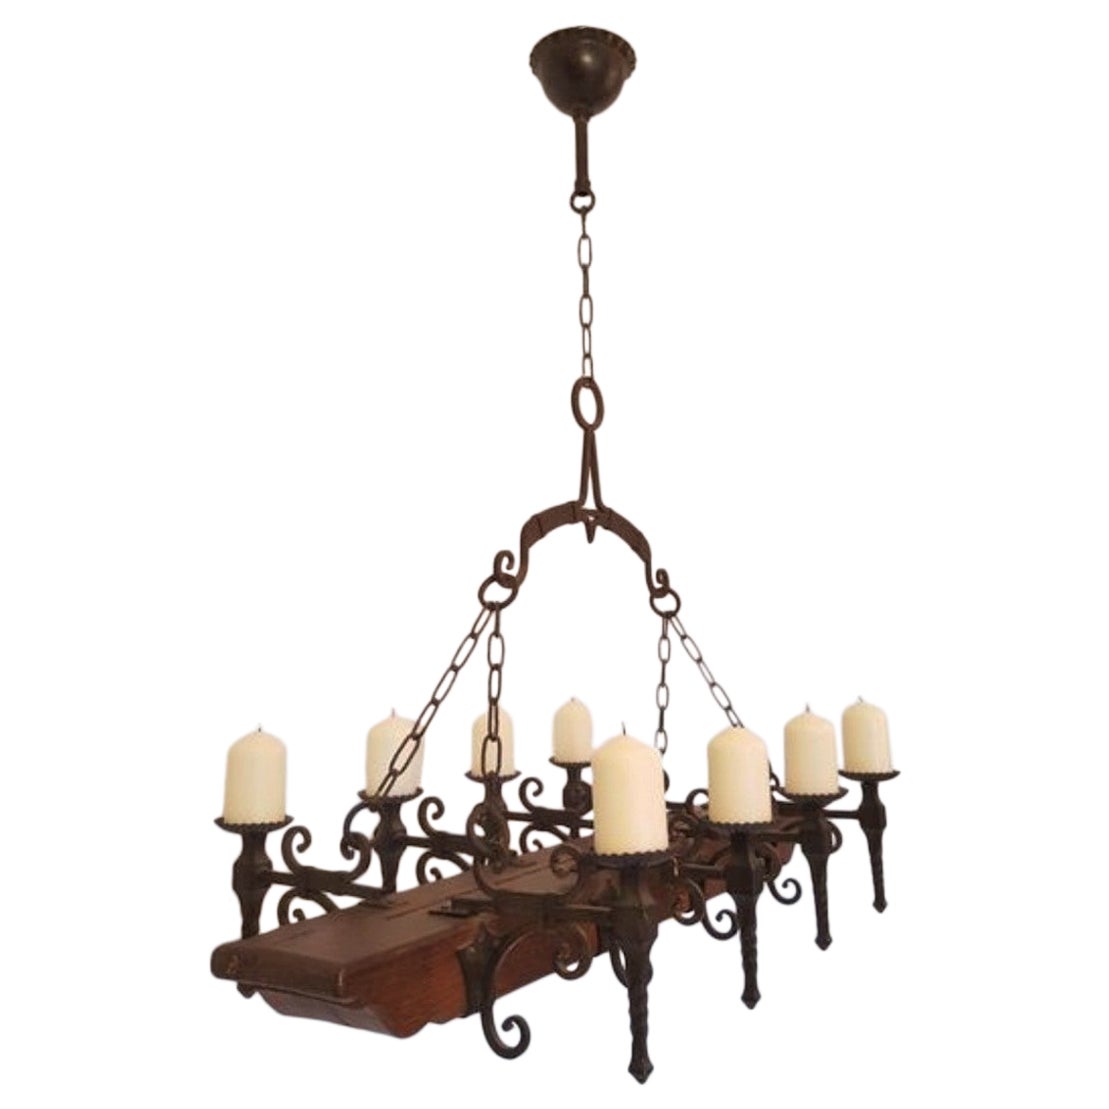 Spanish Handcrafted Forged Wrought Iron Oak Castle Chandelier, Mid-19th Century  For Sale